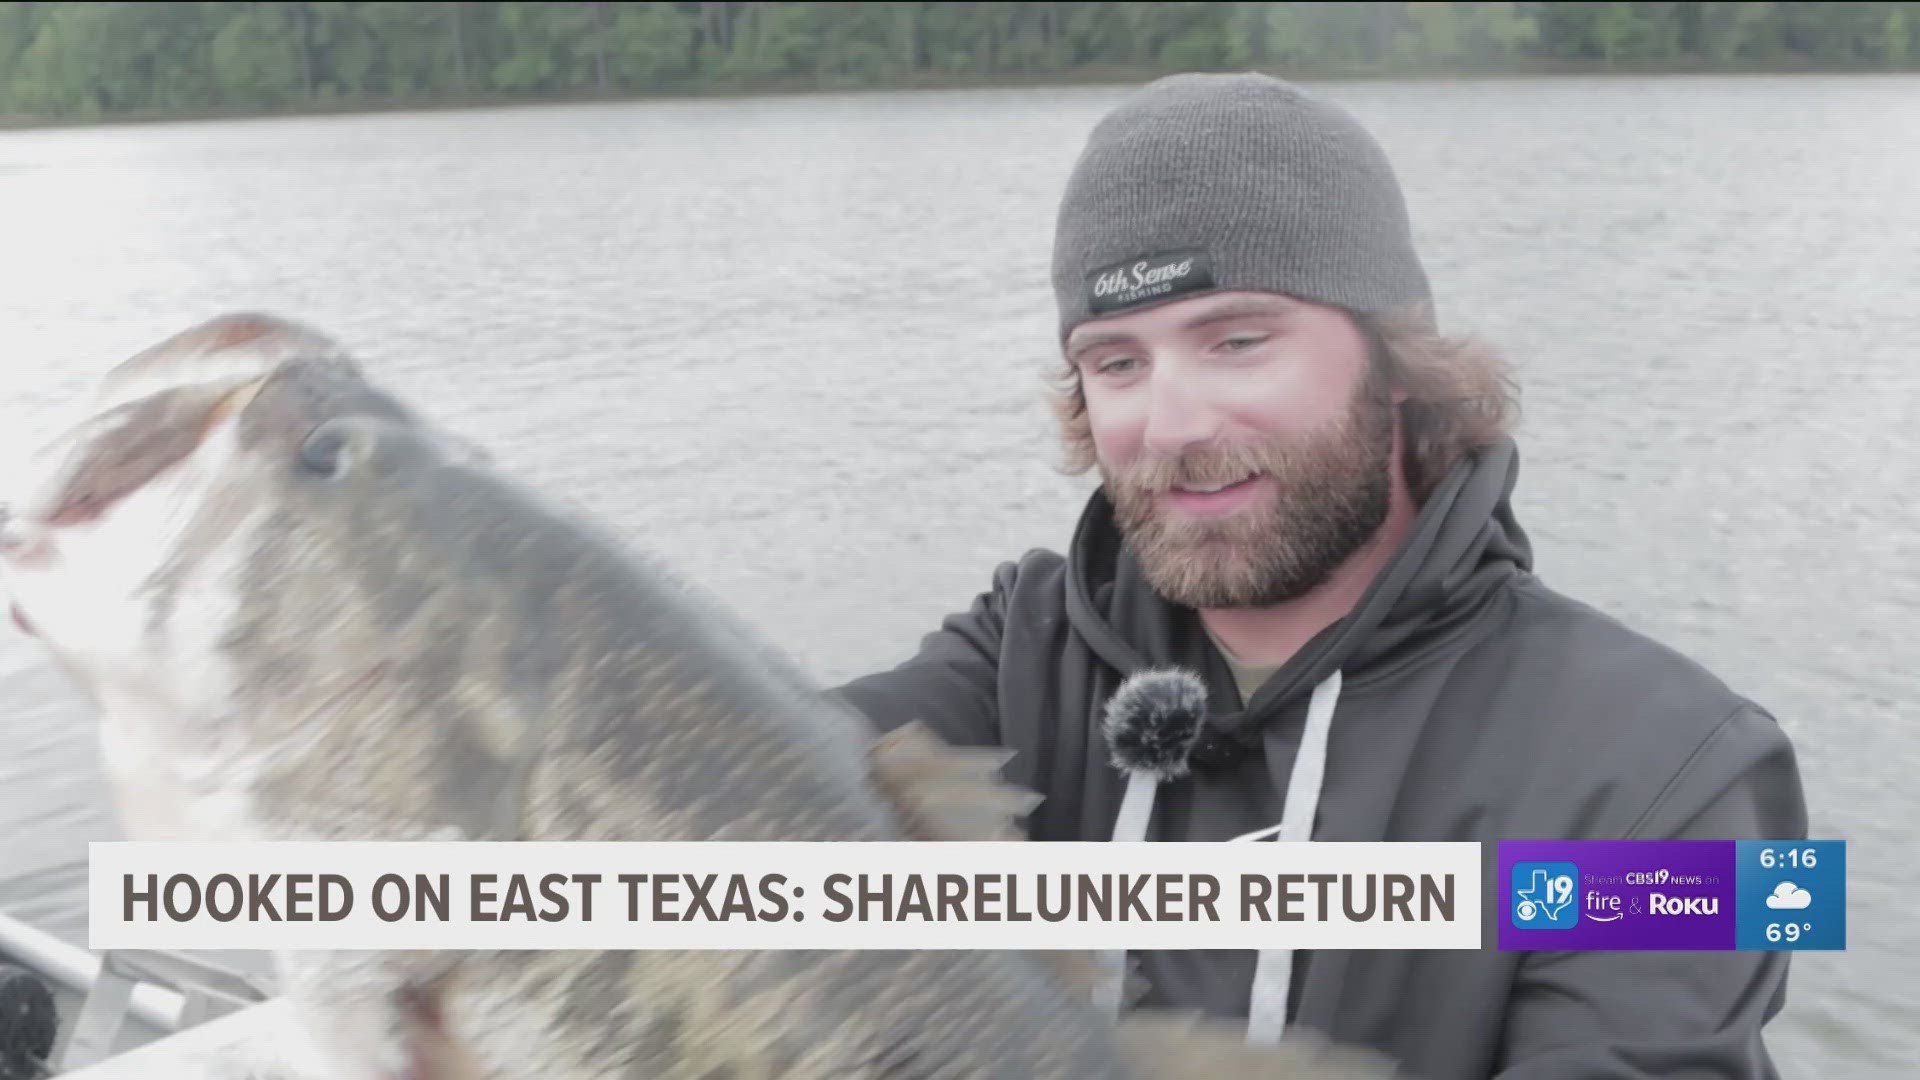 For more Hooked On East Texas Stories visit cbs19.tv/hooked-on-east-texas